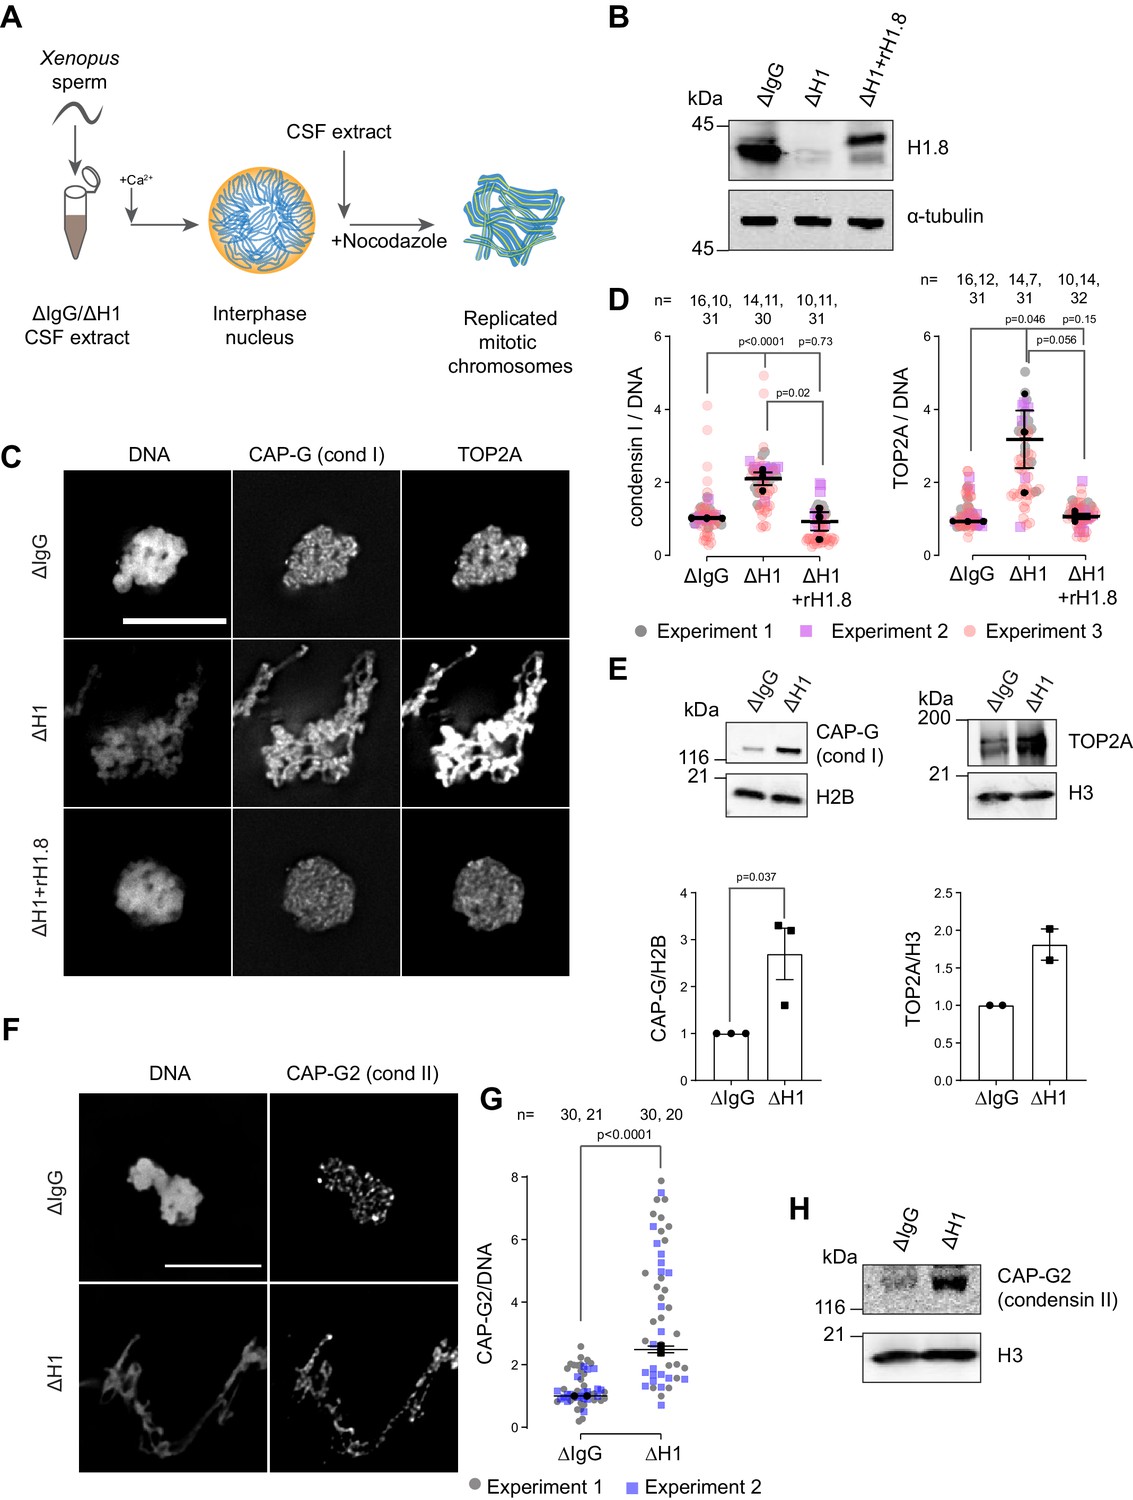 Linker histone H1.8 inhibits chromatin of condensins and DNA topoisomerase II to tune chromosome length and individualization | eLife